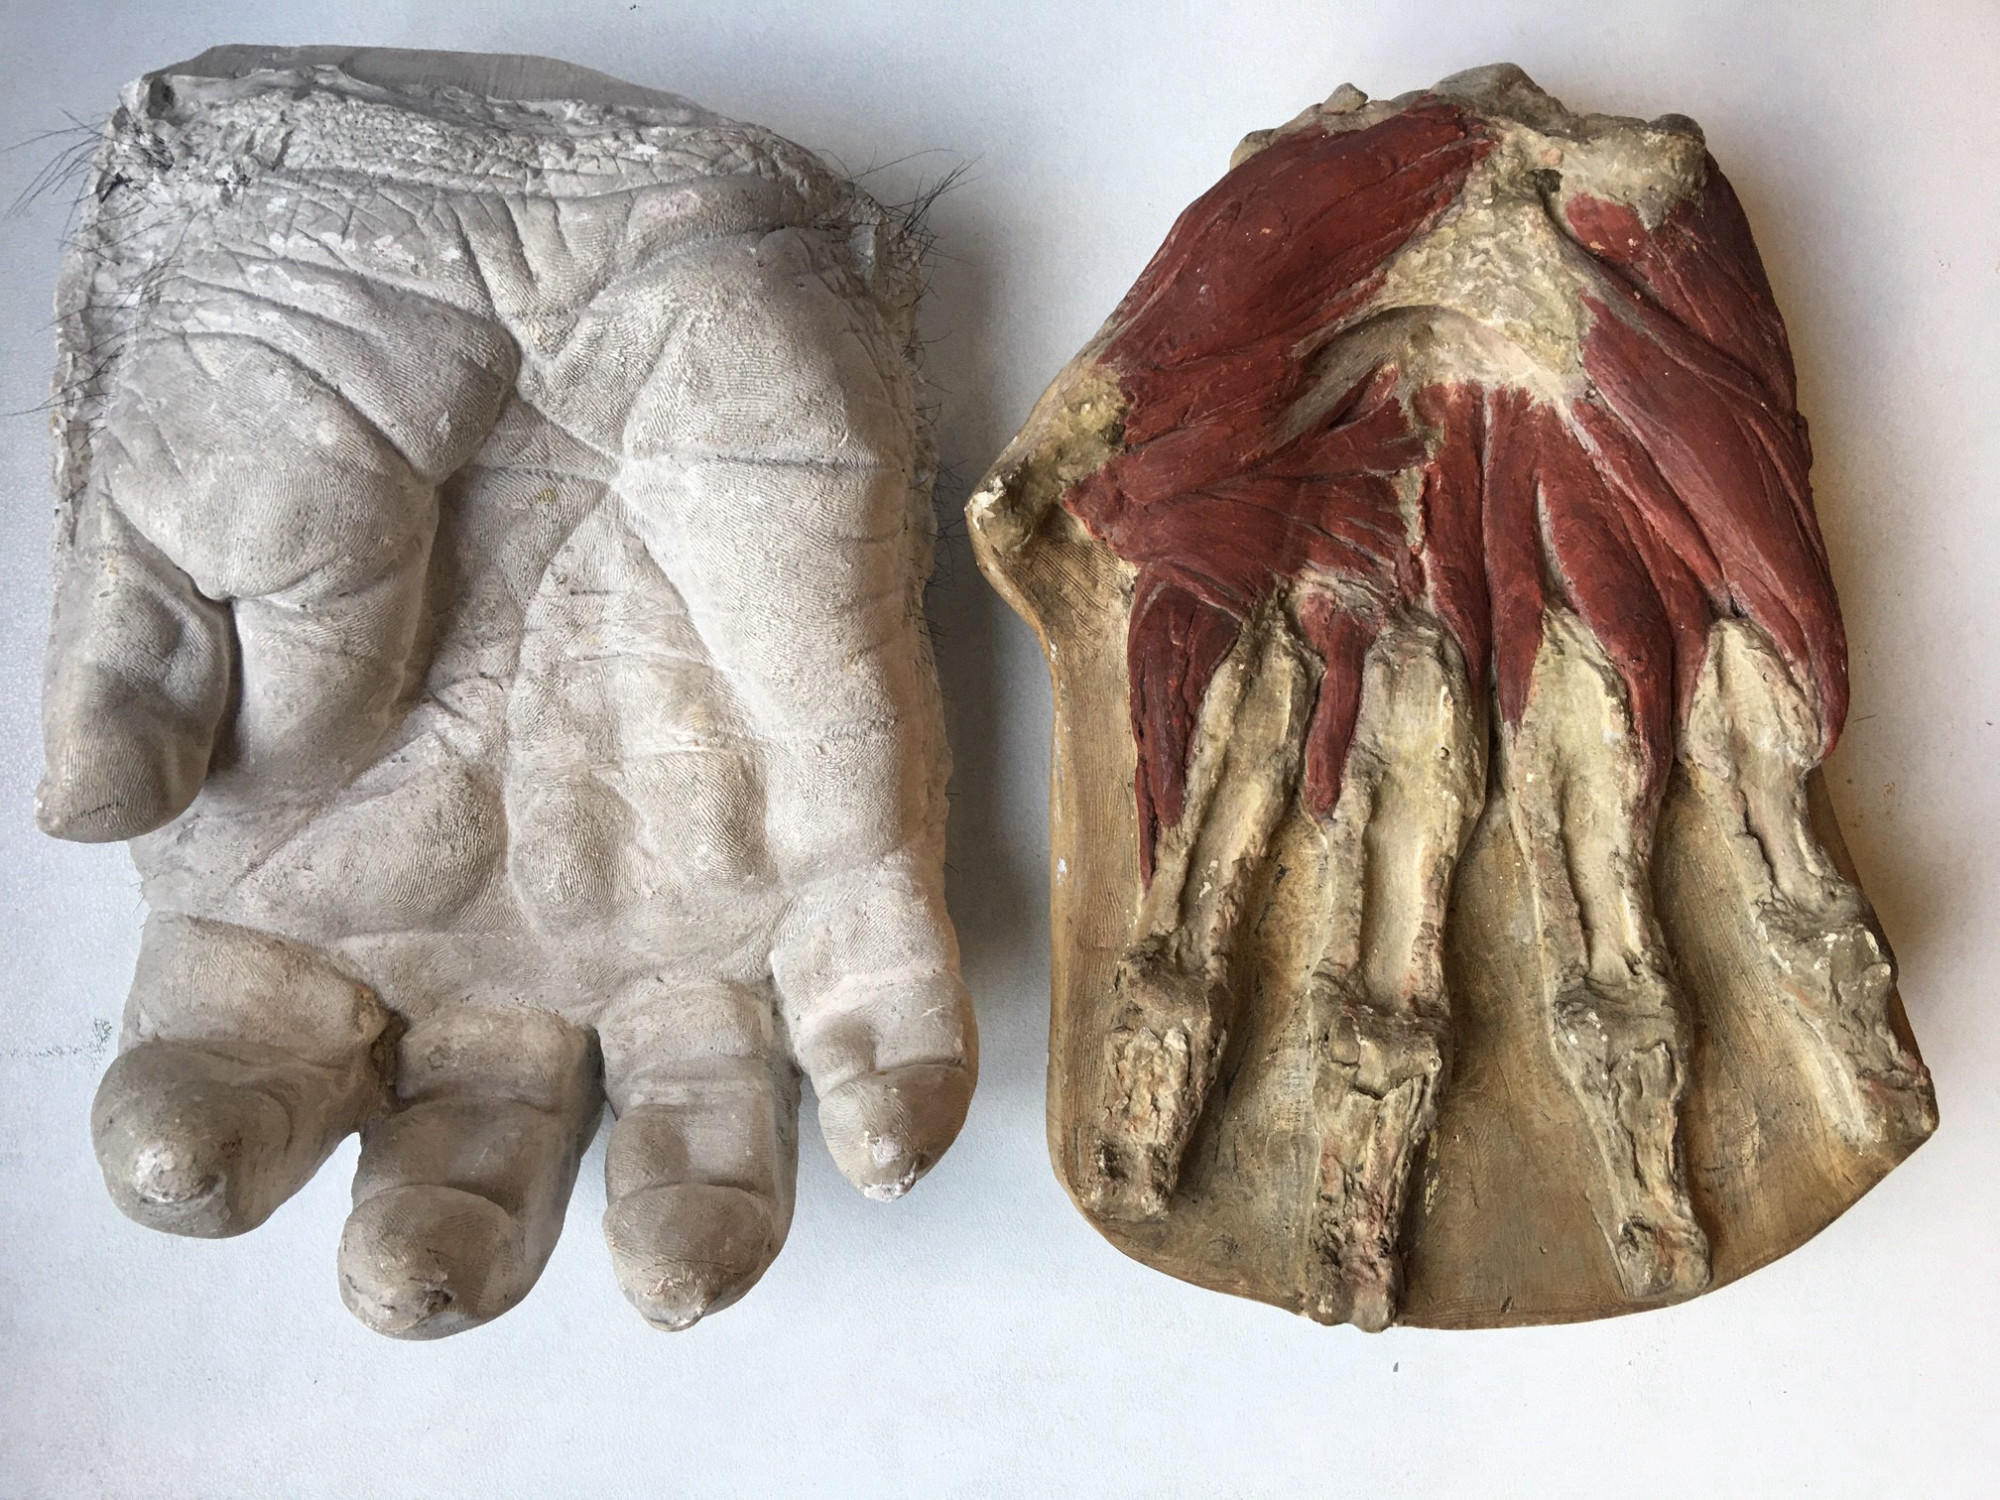 Two plaster casts of "Bobby" the gorilla's hand from above. The muscles in the left cast have been exposed and coloured. Next to it is a white plaster cast of the hand.